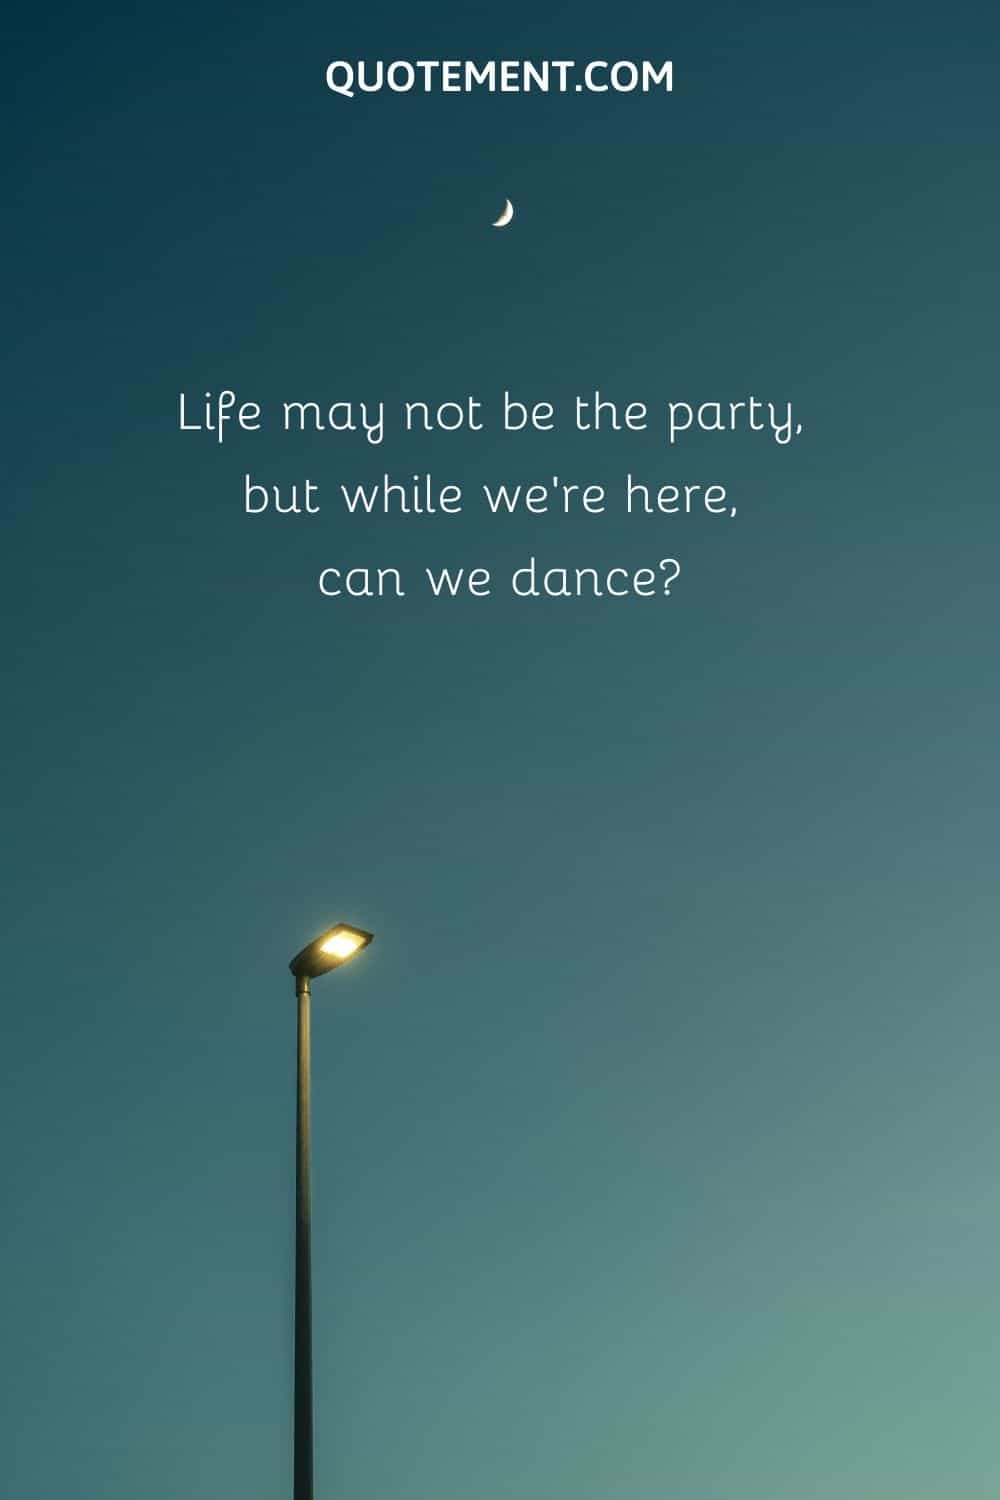 Life may not be the party, but while we're here, can we dance